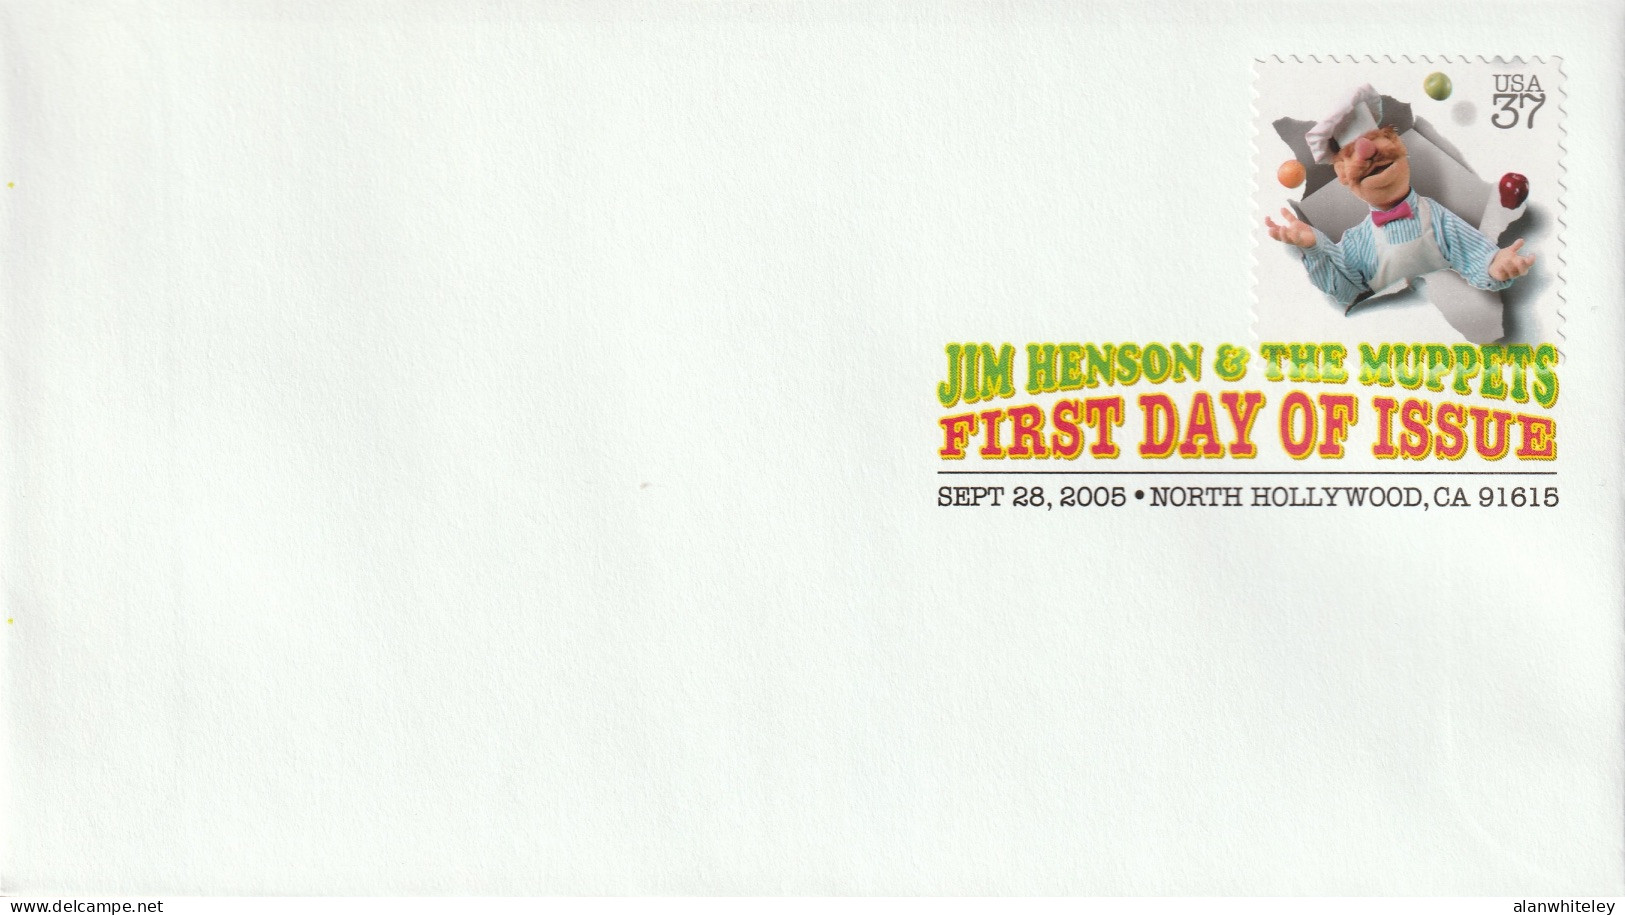 UNITED STATES 2005 Jim Henson & The Muppets: Set of 11 First Day Covers CANCELLED